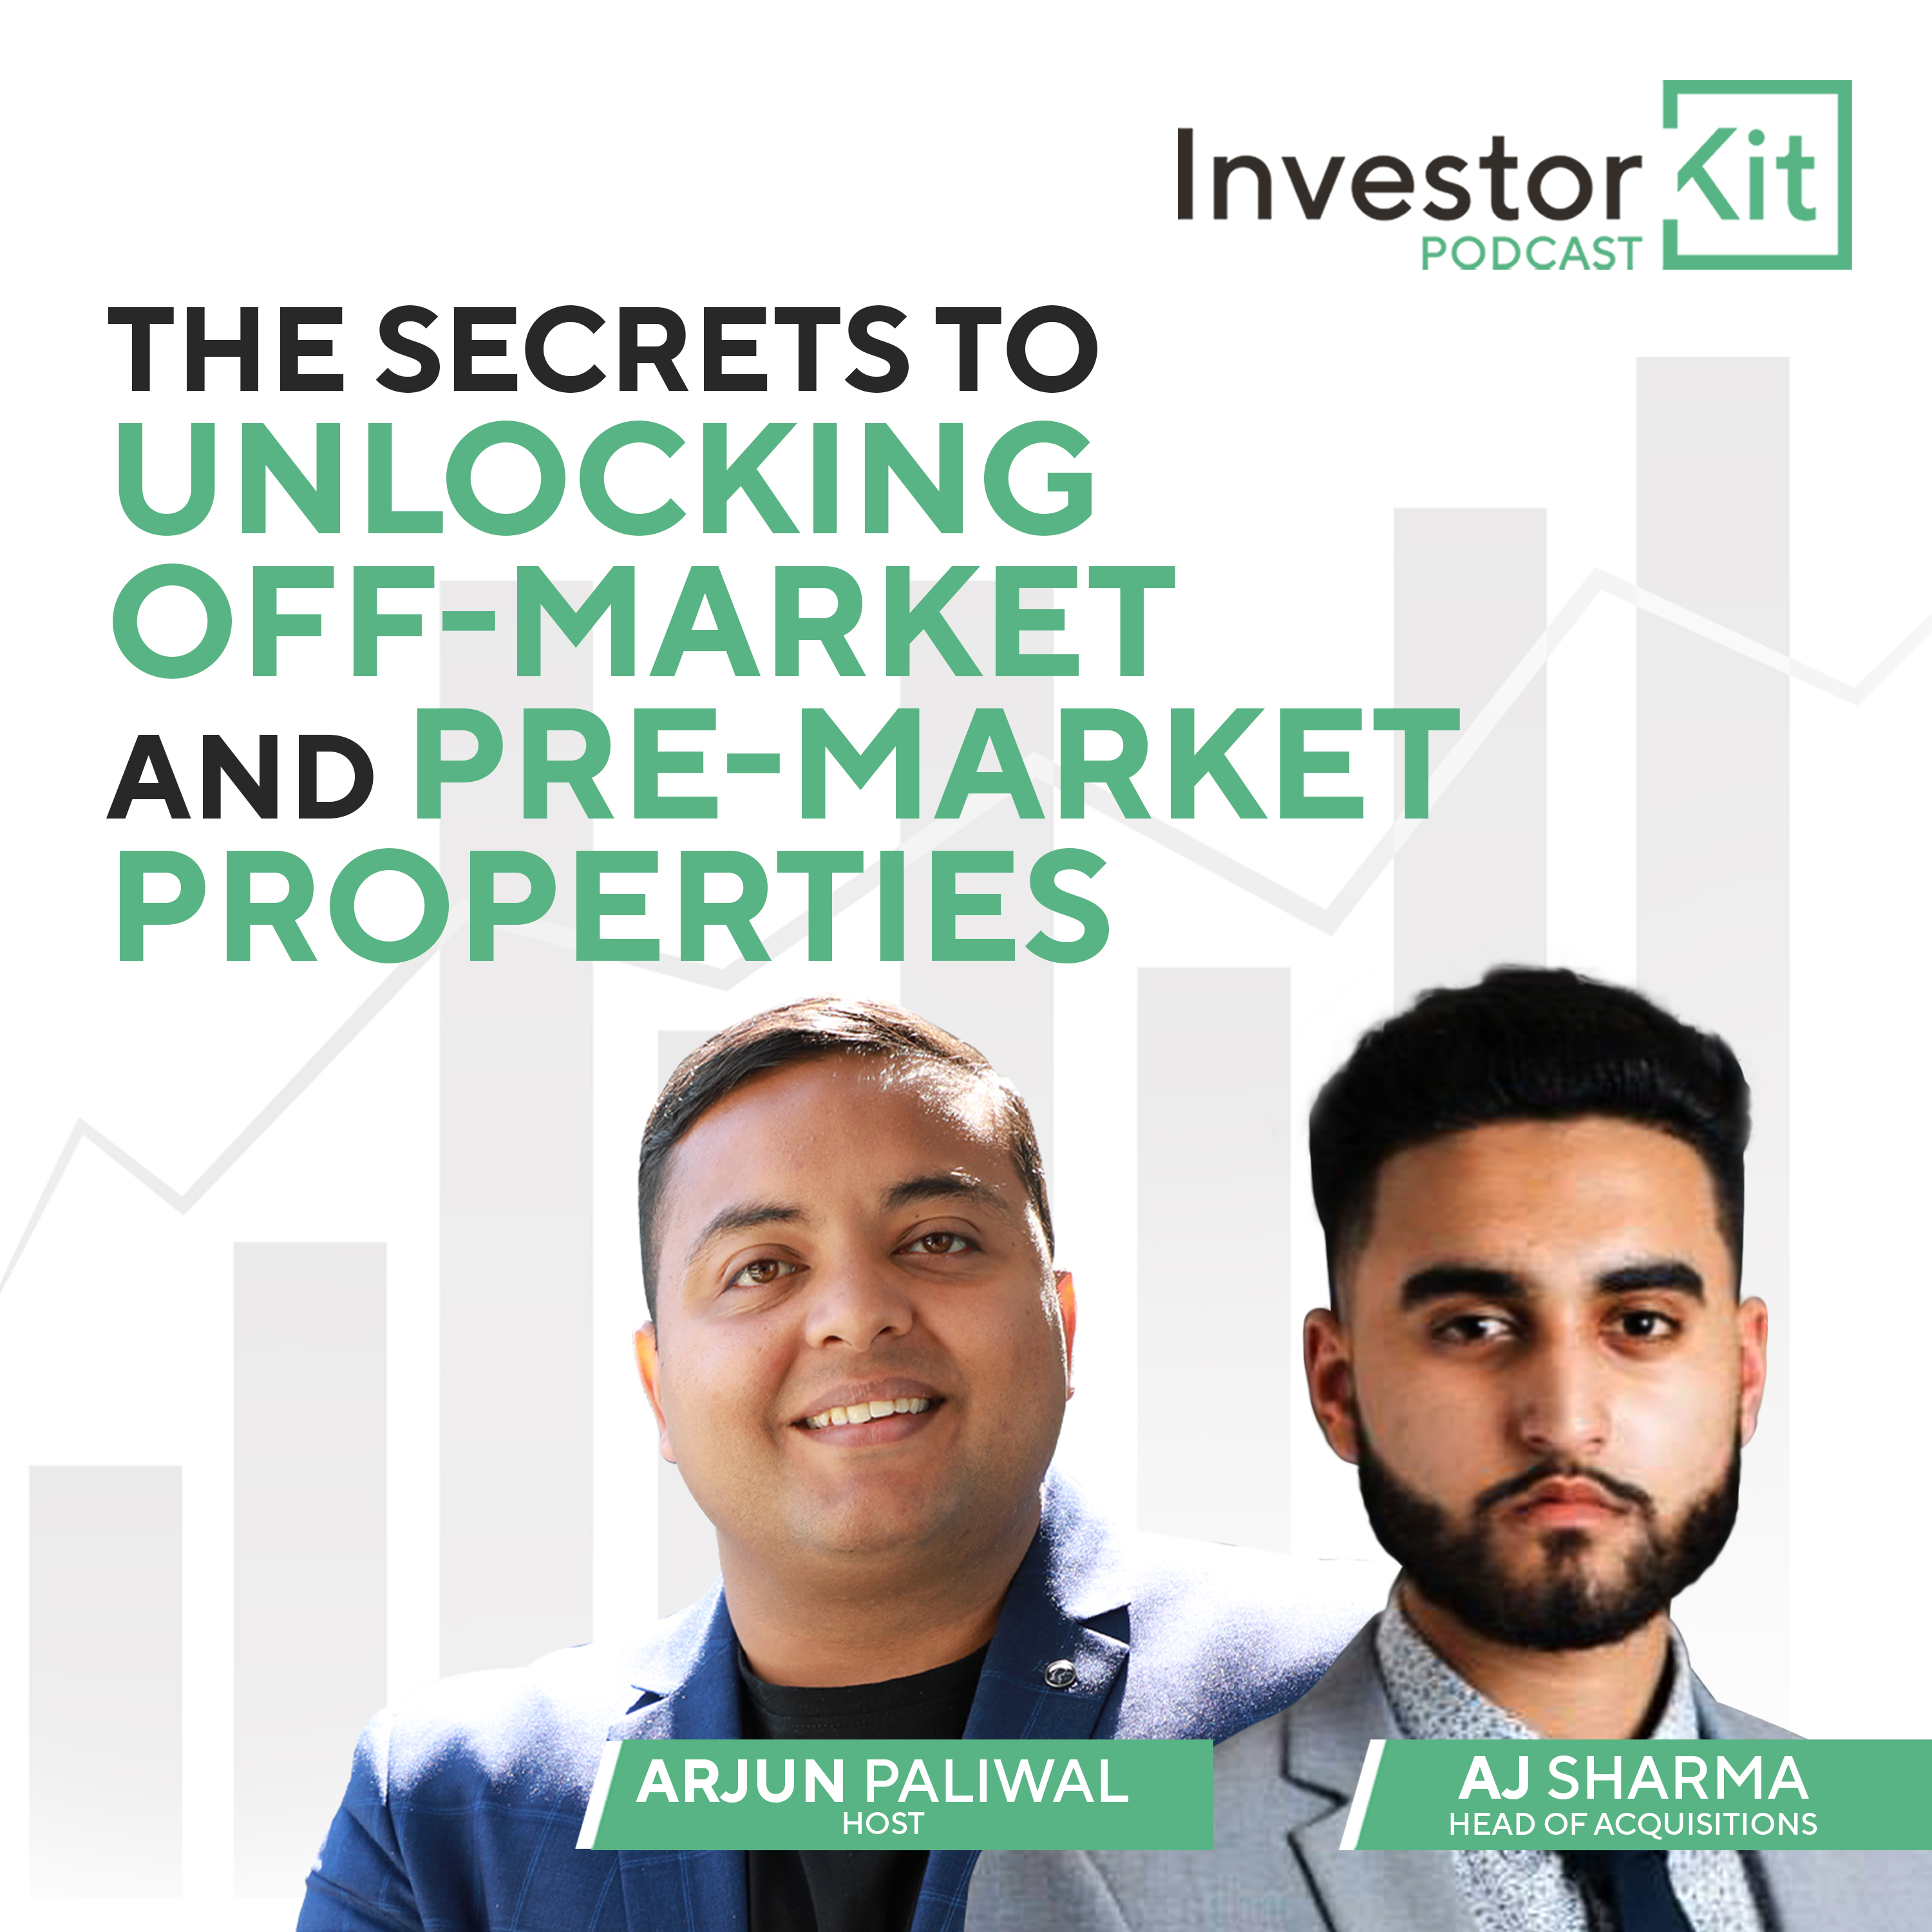 The Secrets To Unlocking Off-Market and Pre-Market Properties